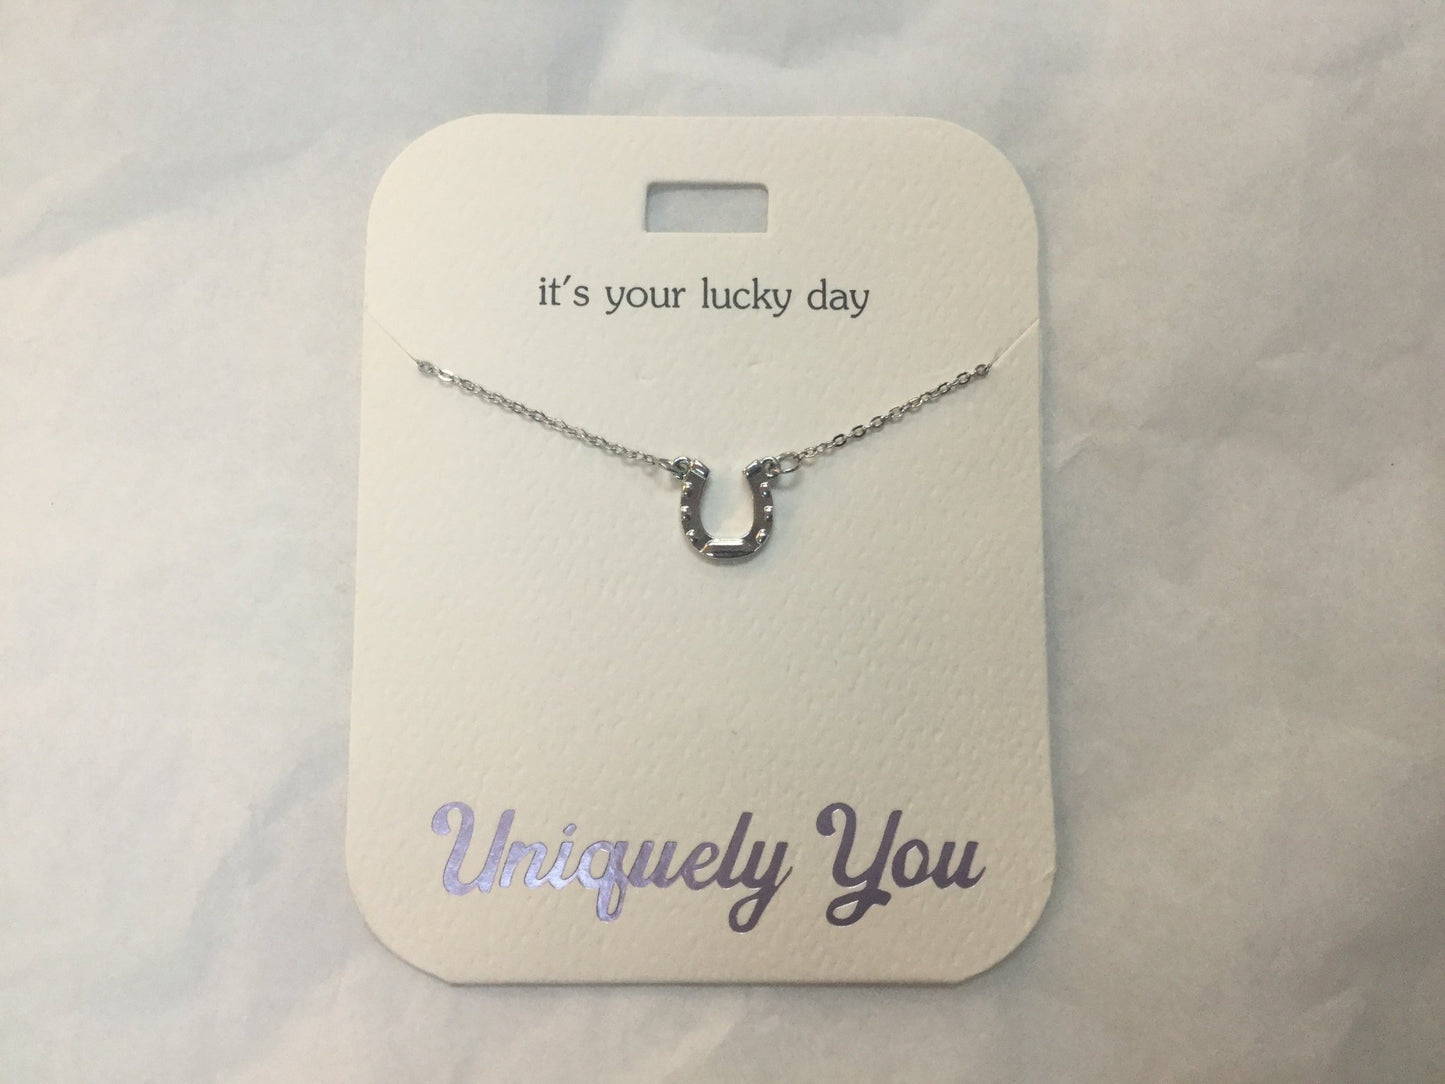 Necklace - YOU 4022 - It’s your lucky day